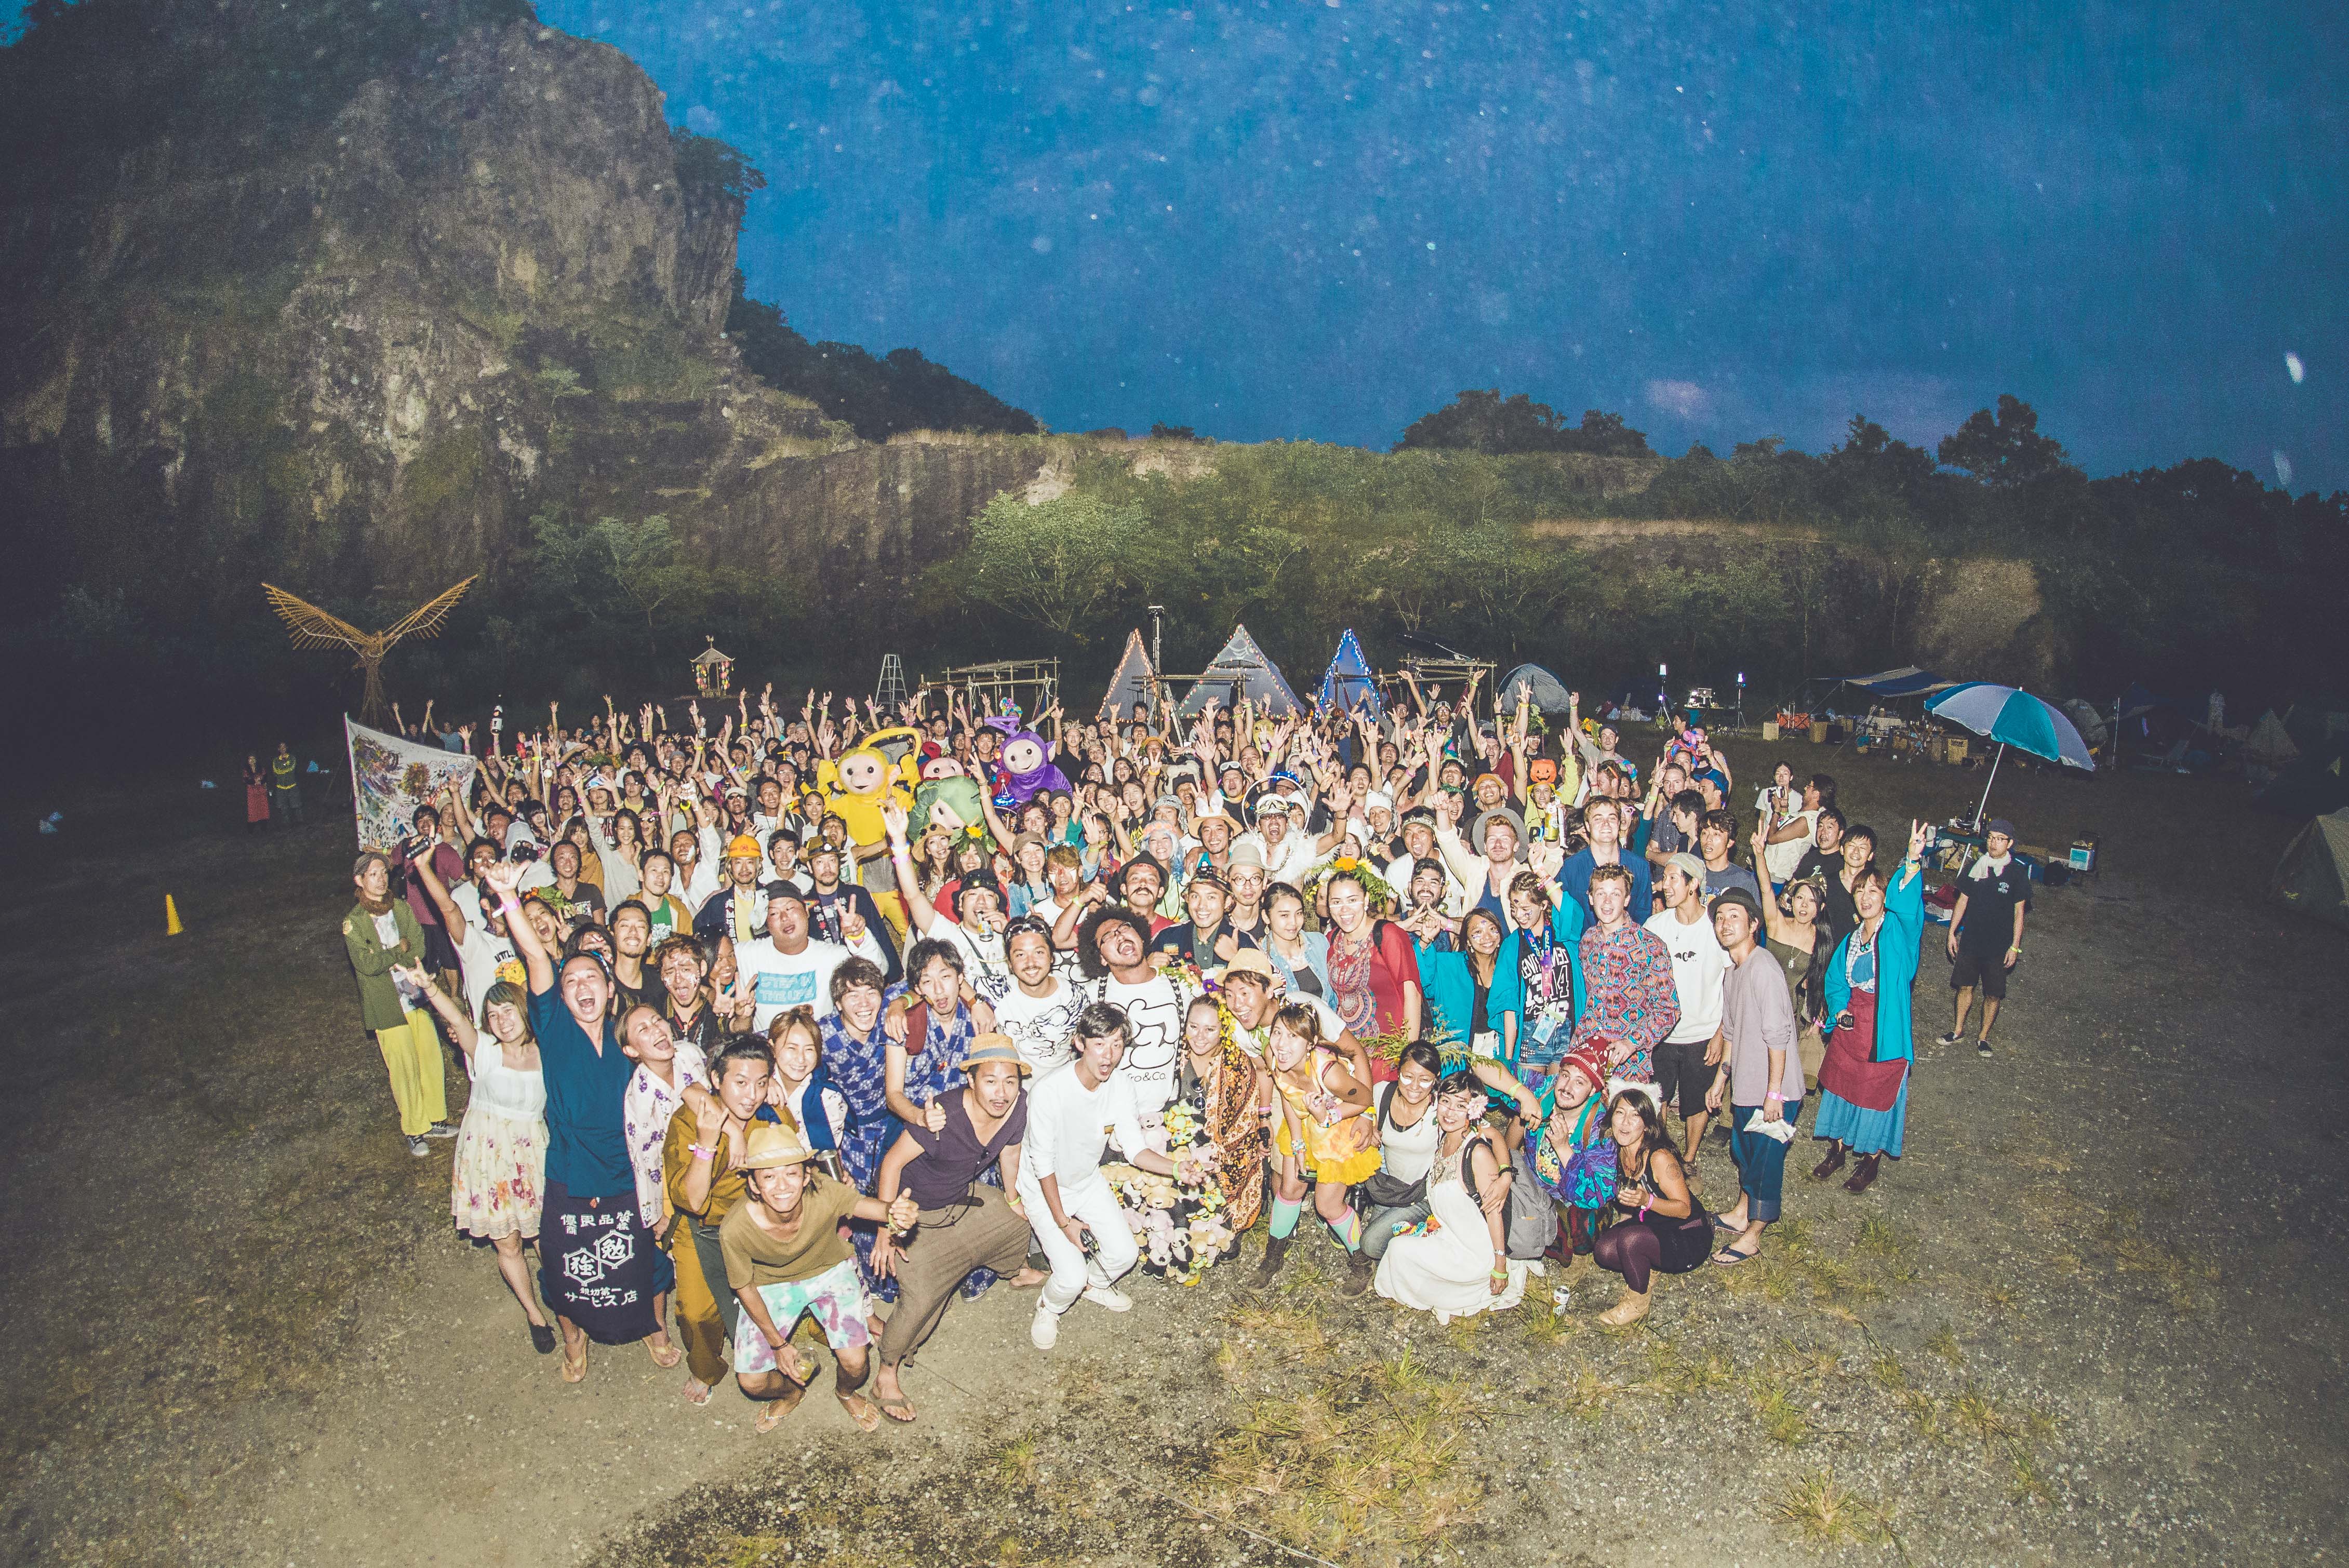 Participants gather for a group photo on burn night. Photo by Kiruke.